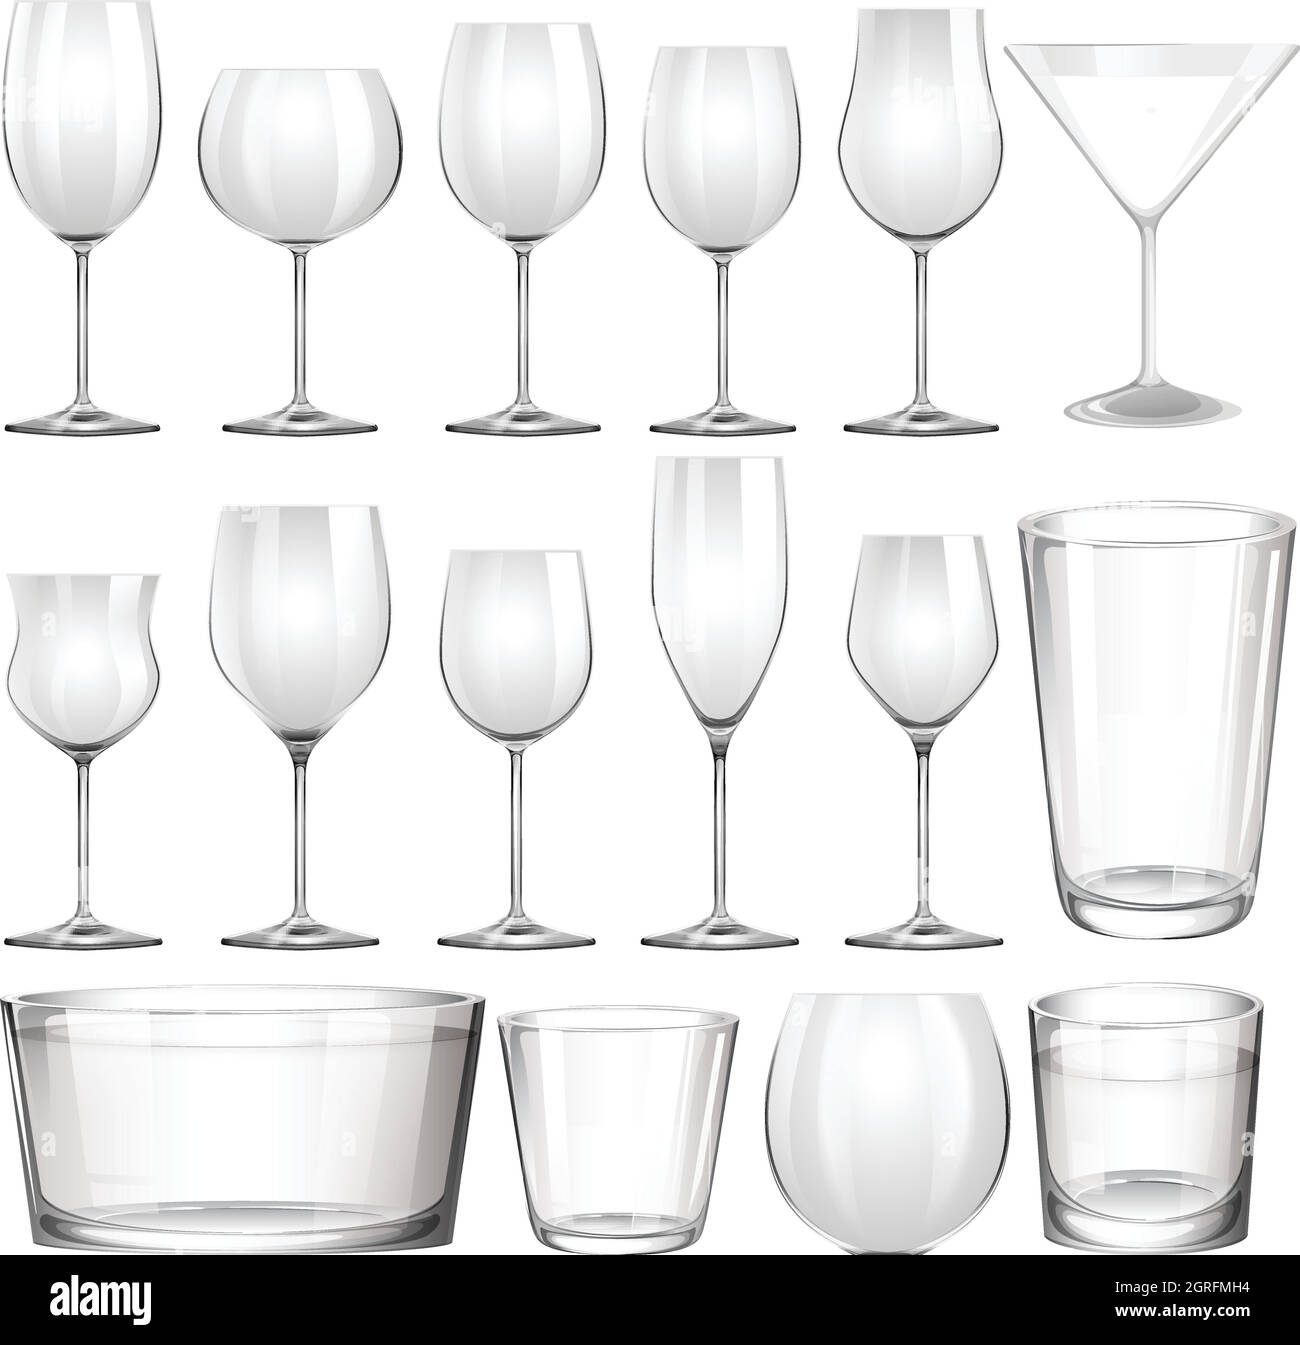 Set of wine glasses and cups Stock Vector